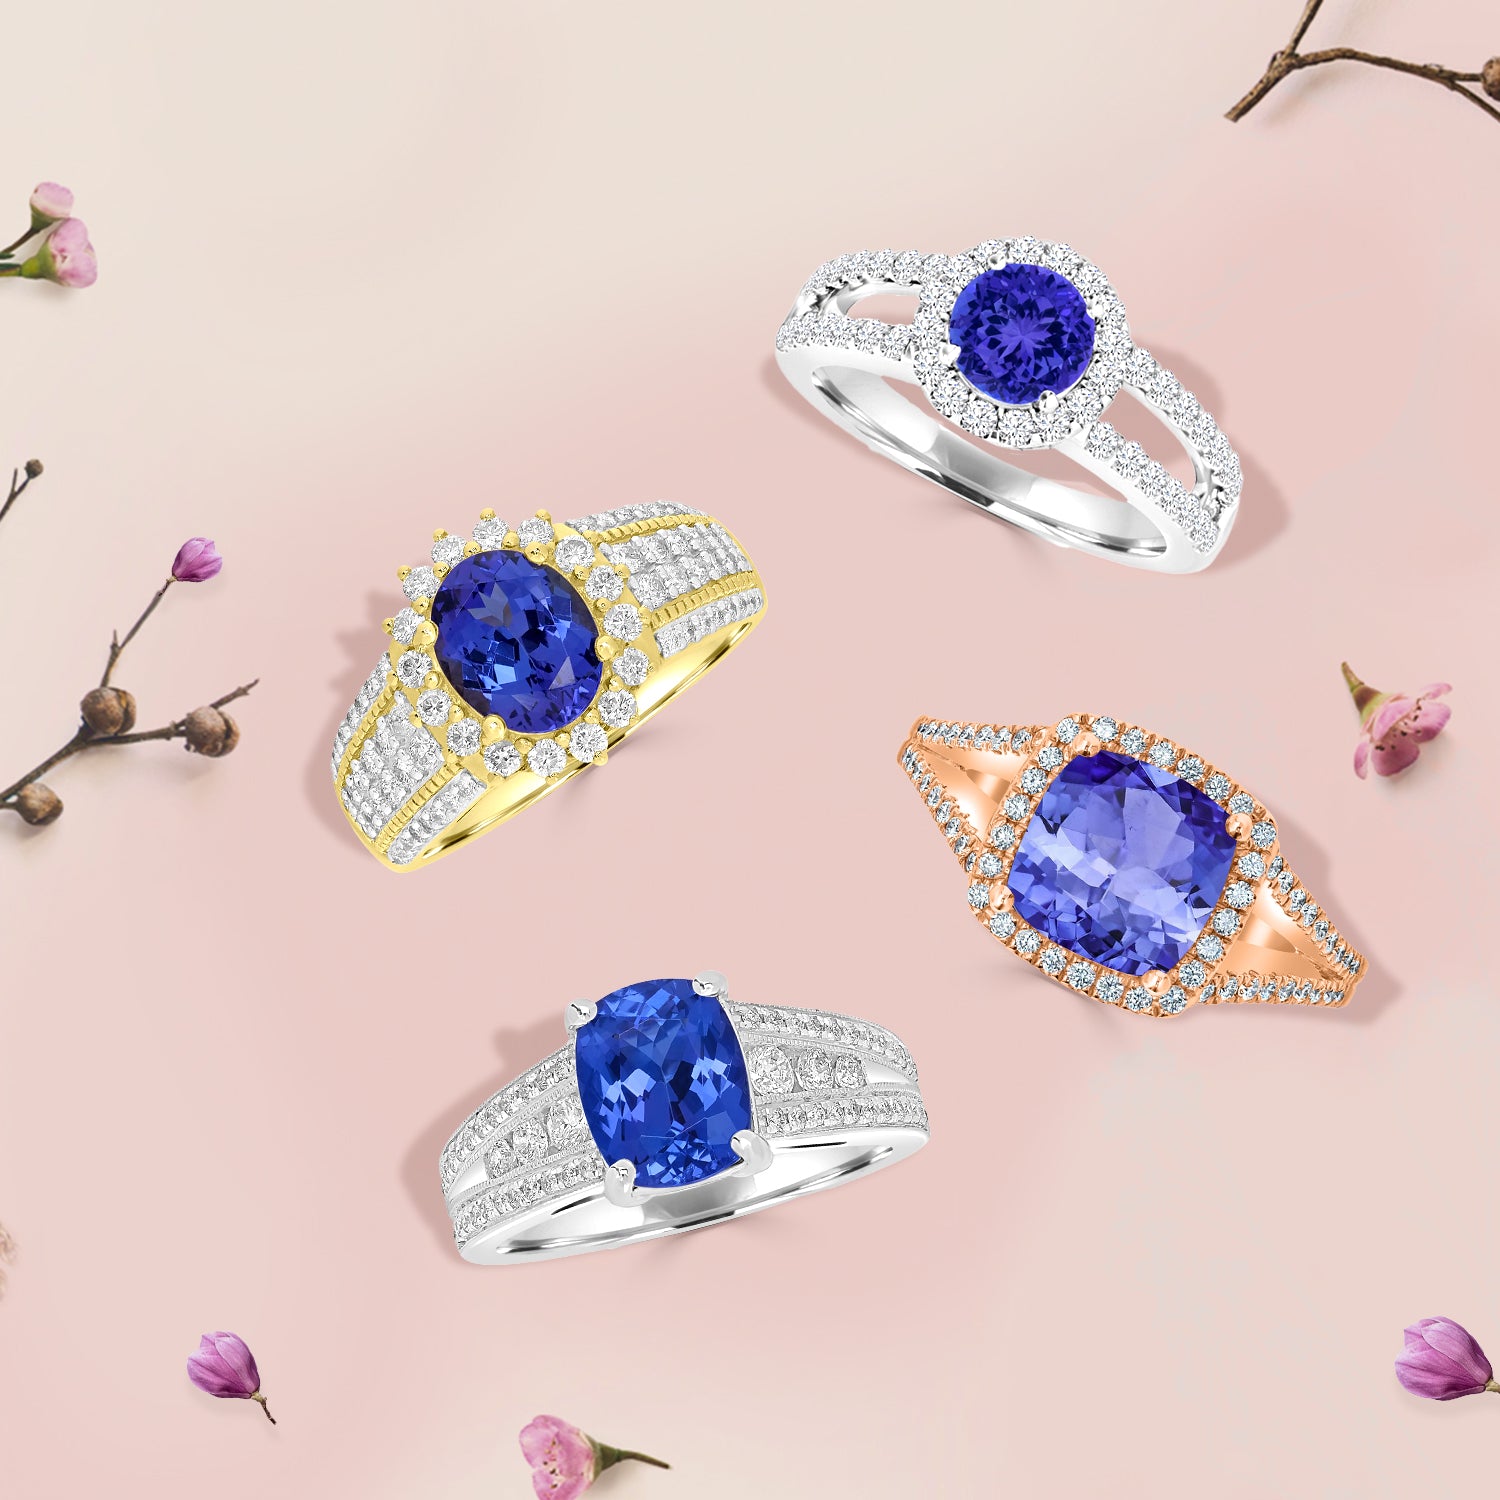 Steal the spotlight with these 3 tanzanite rings